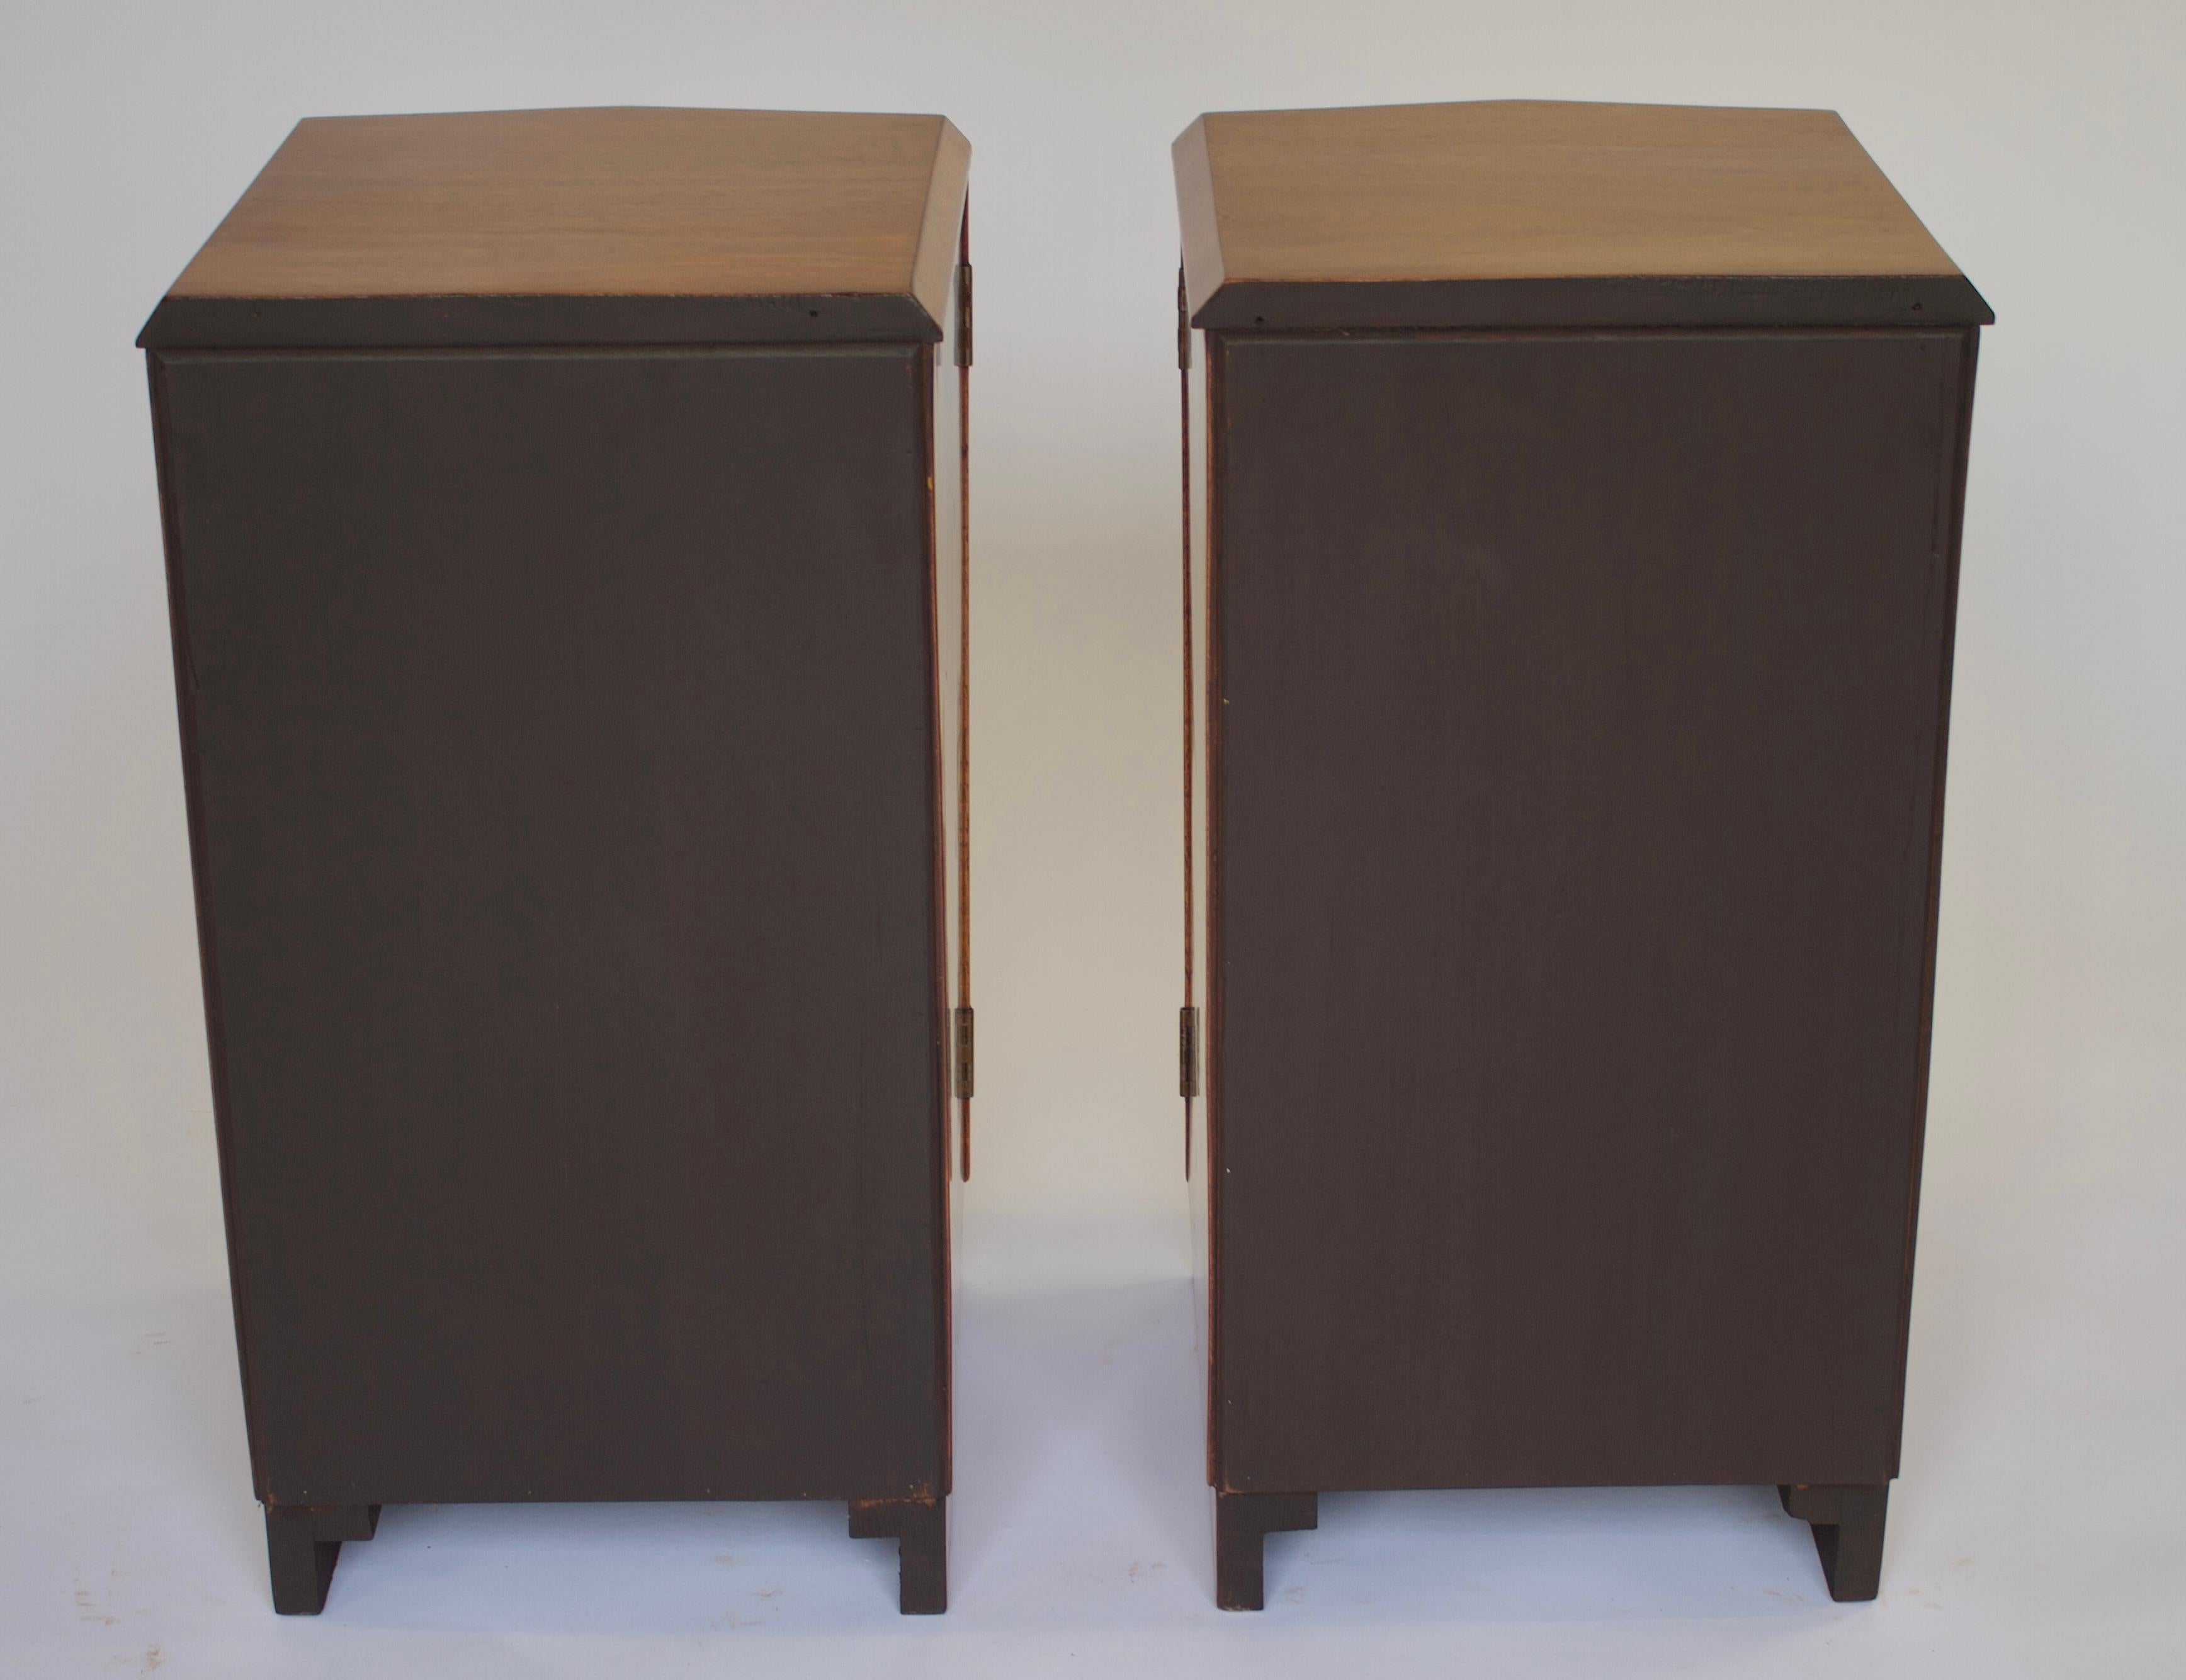 Pair Art Deco Walnut & Burr Walnut Bedside Cupboards
Circa  1930s
Plain walnut tops with chamfered edges,
V Shaped fronts with burr walnut veneer on doors, 
metal ball catch,  
shaped walnut handles, open to reveal:
Interior with single drawer at